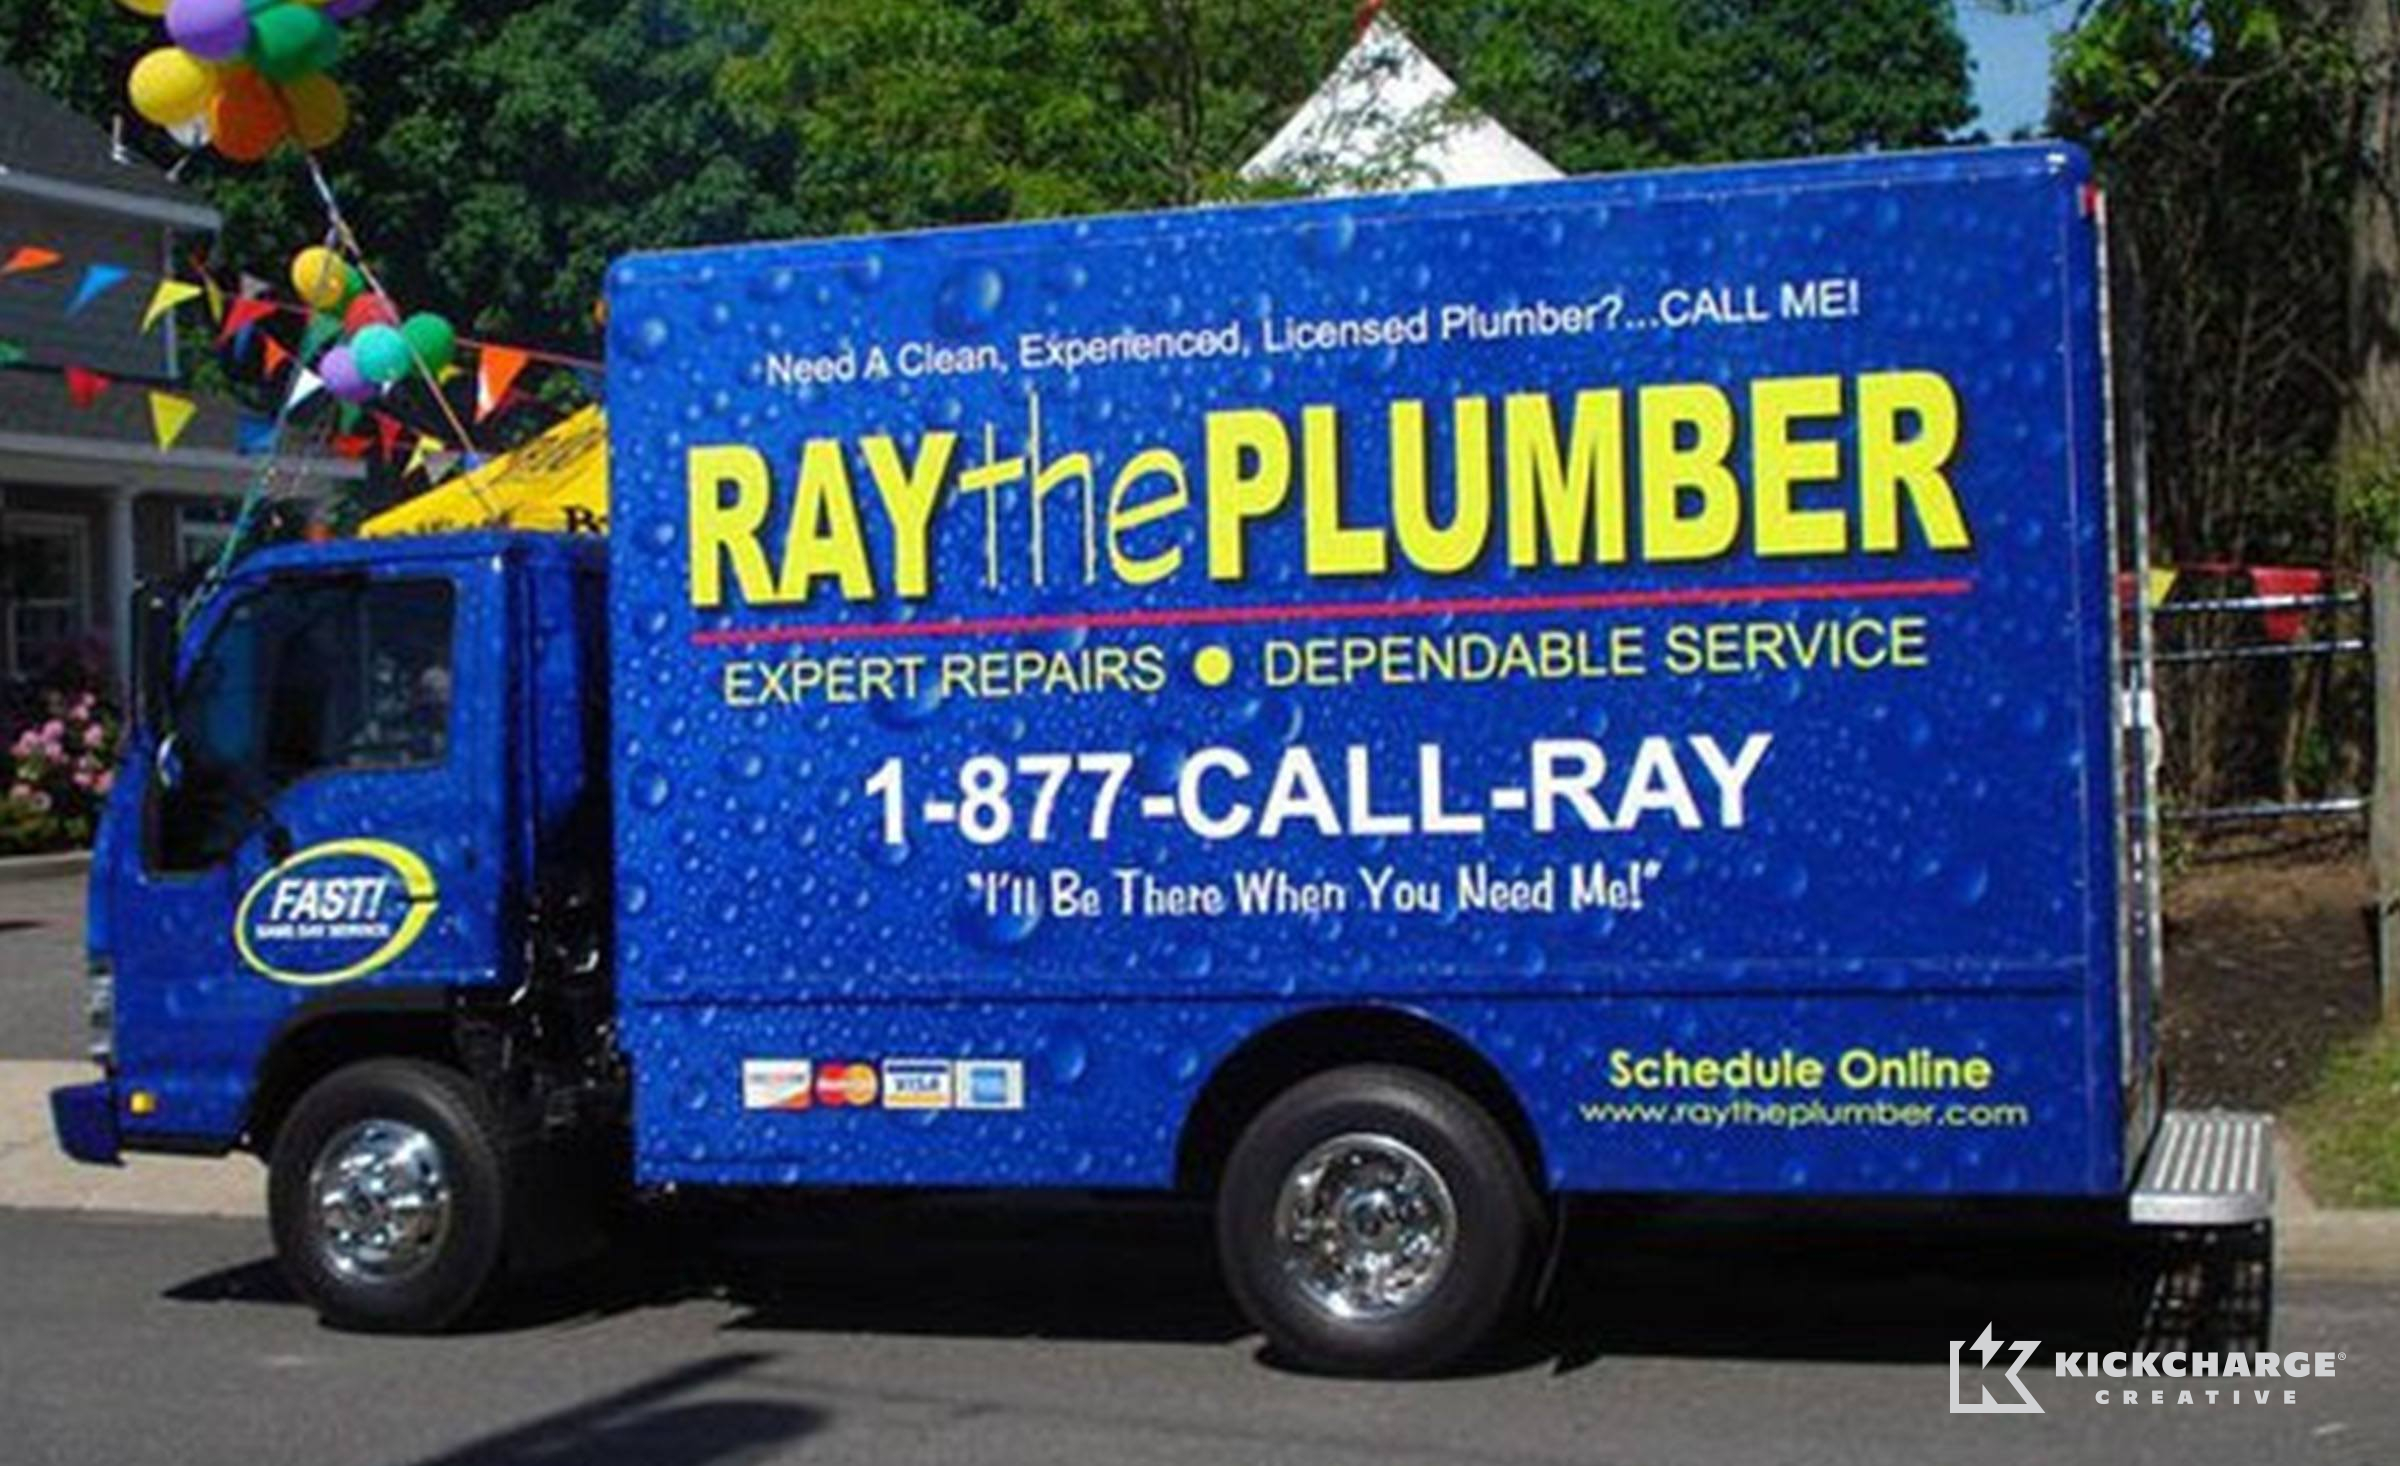 Ray the Plumber